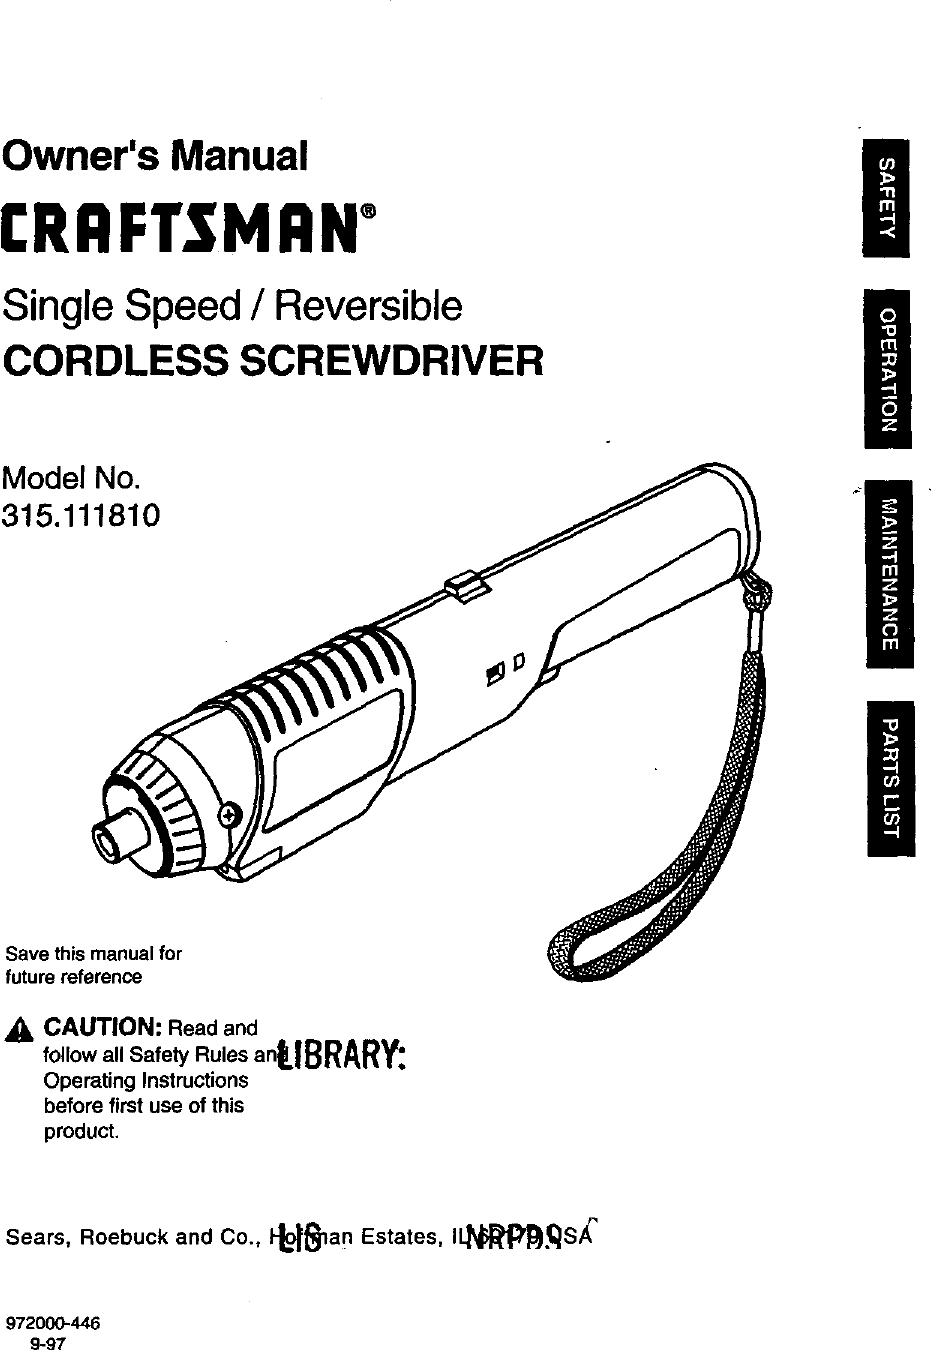 Page 1 of 12 - Craftsman 315111810 User Manual  SINGLE SPEED REVERSIBLE CORDLESS SCREWDRIVER - Manuals And Guides 98100166